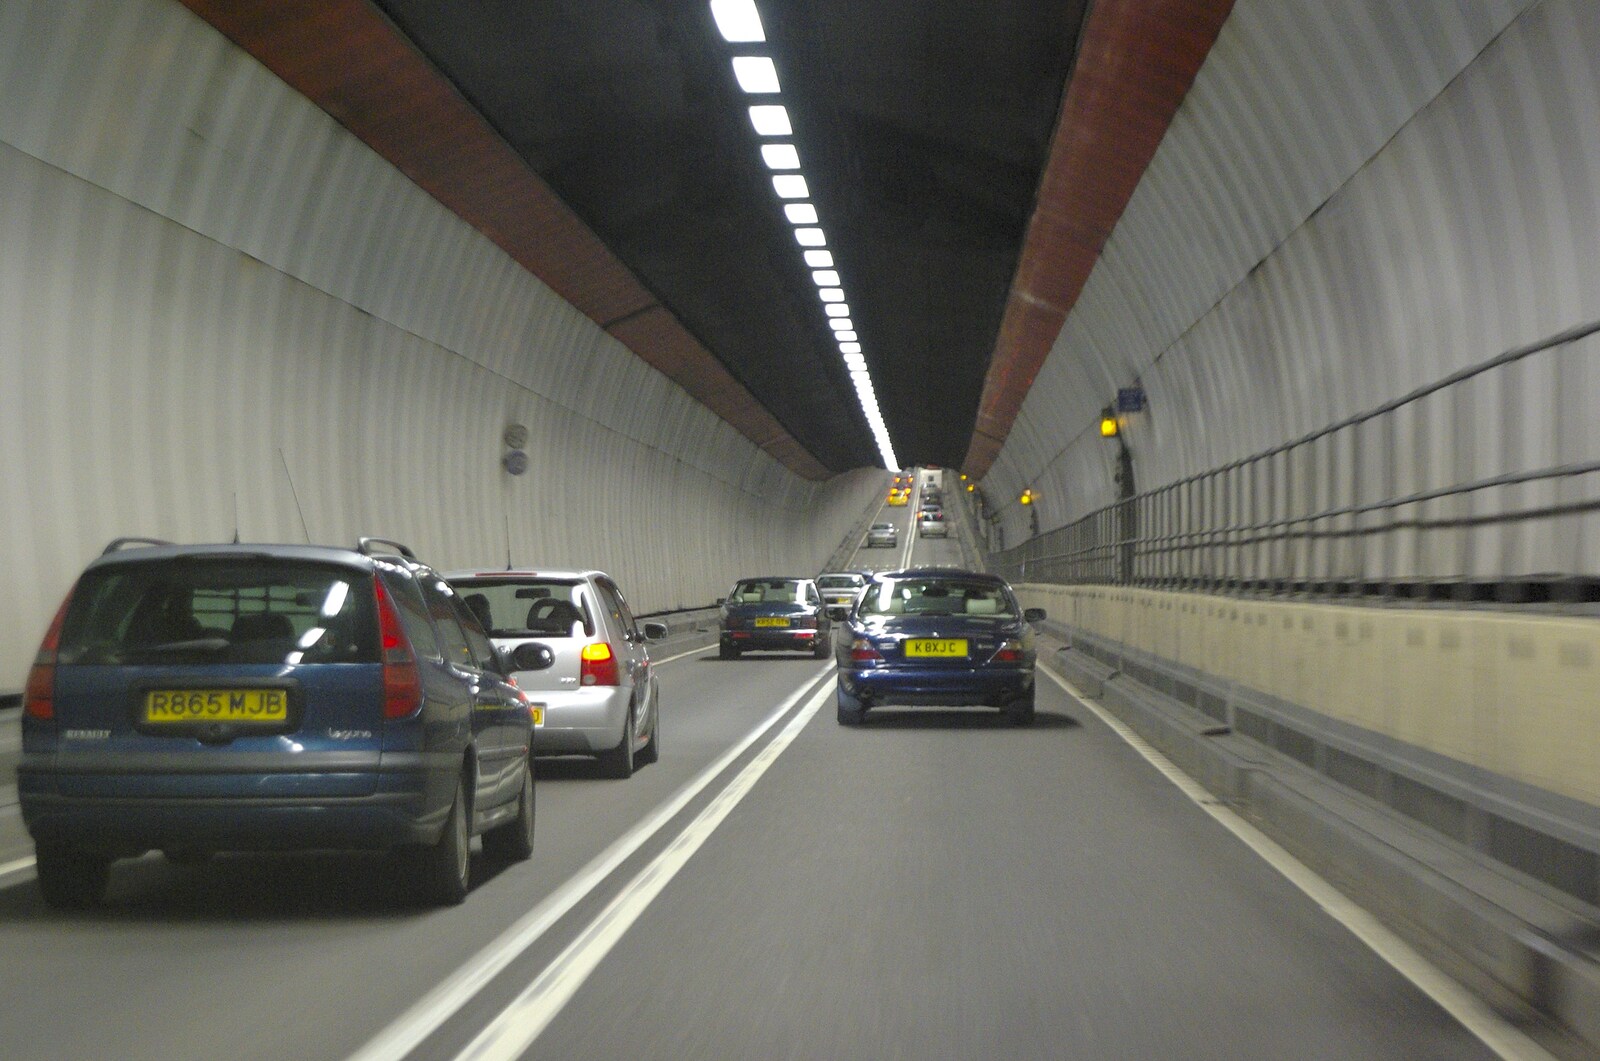 Cars in the Dartford Tunnel from The BBs On Tour, Gatwick Copthorne, West Sussex - 24th November 2007